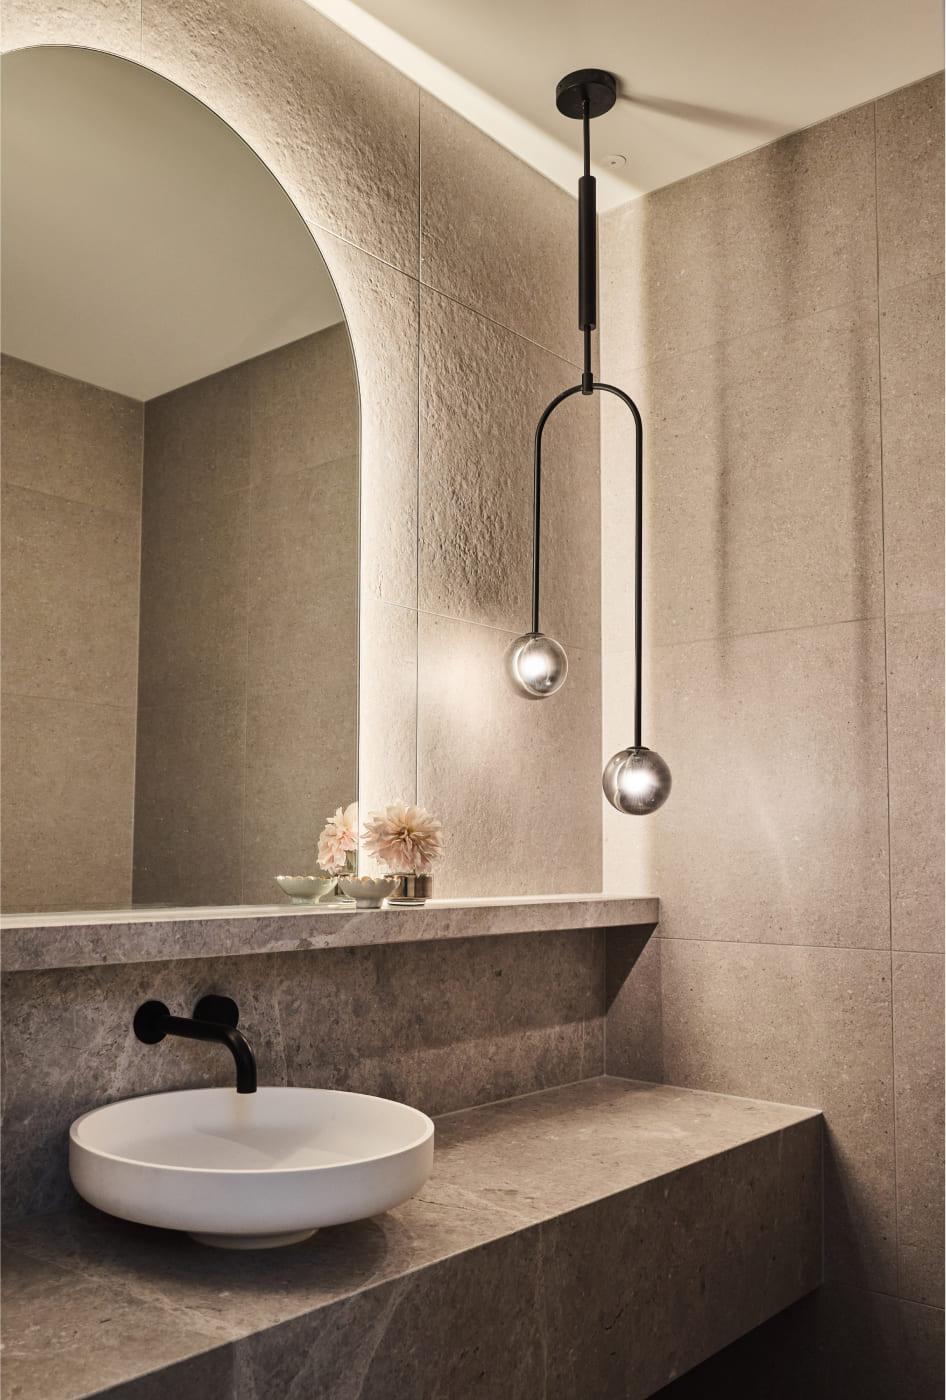 Moody powder room with feature pendant